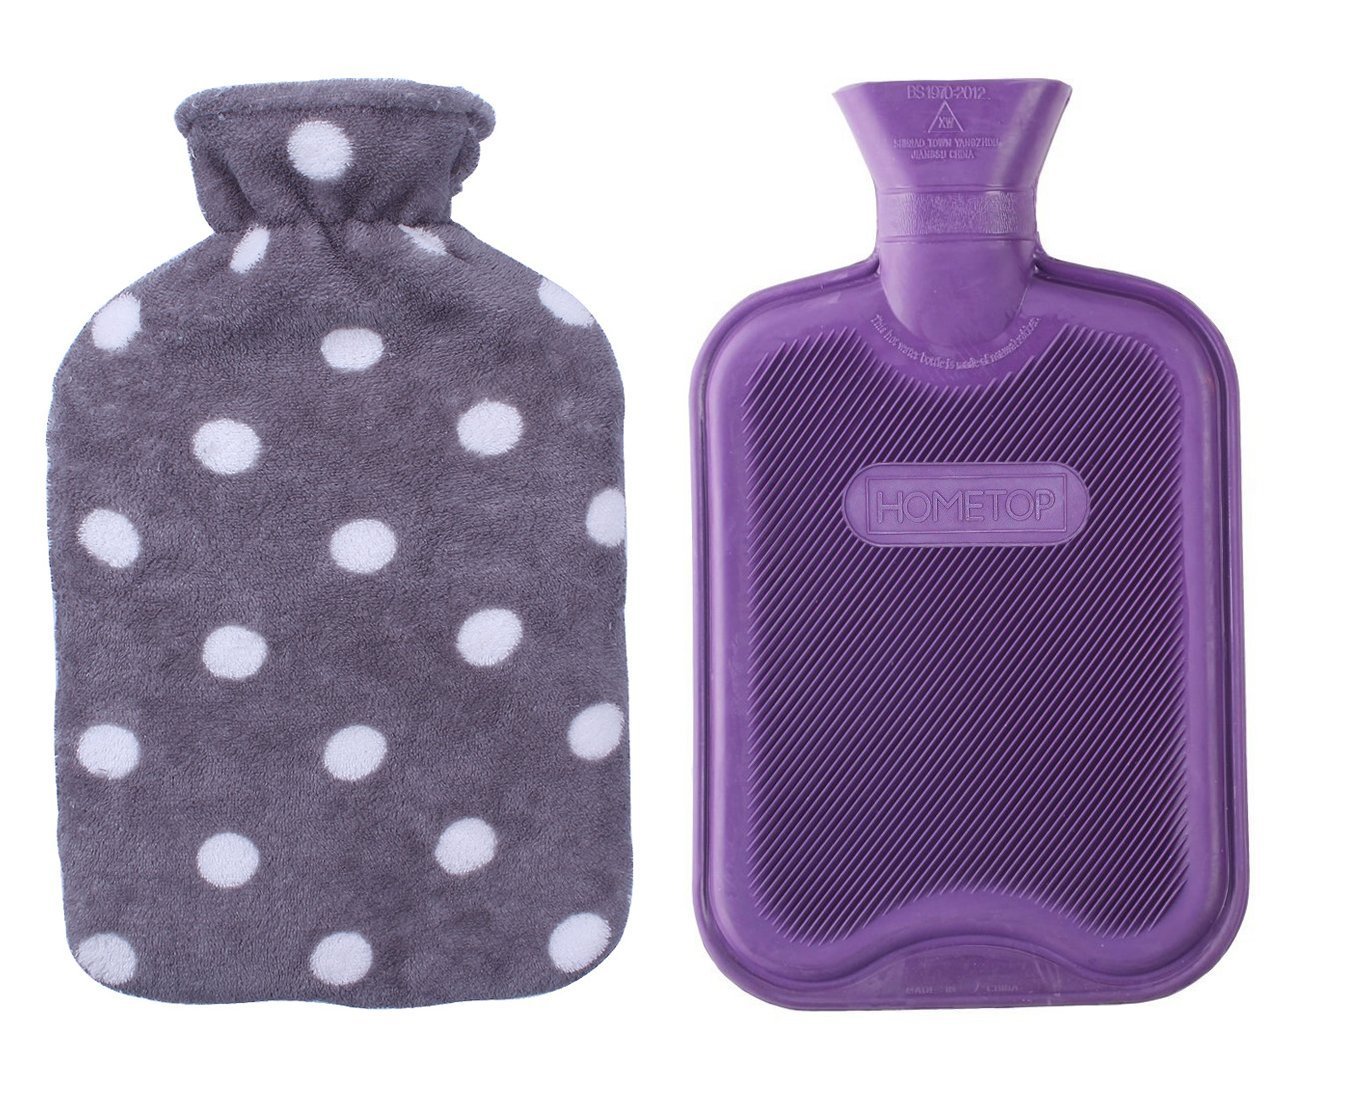 Hometop Multipack Rubber Hot Water Bottle for 2L Red and 1L Purple (2 Pack)